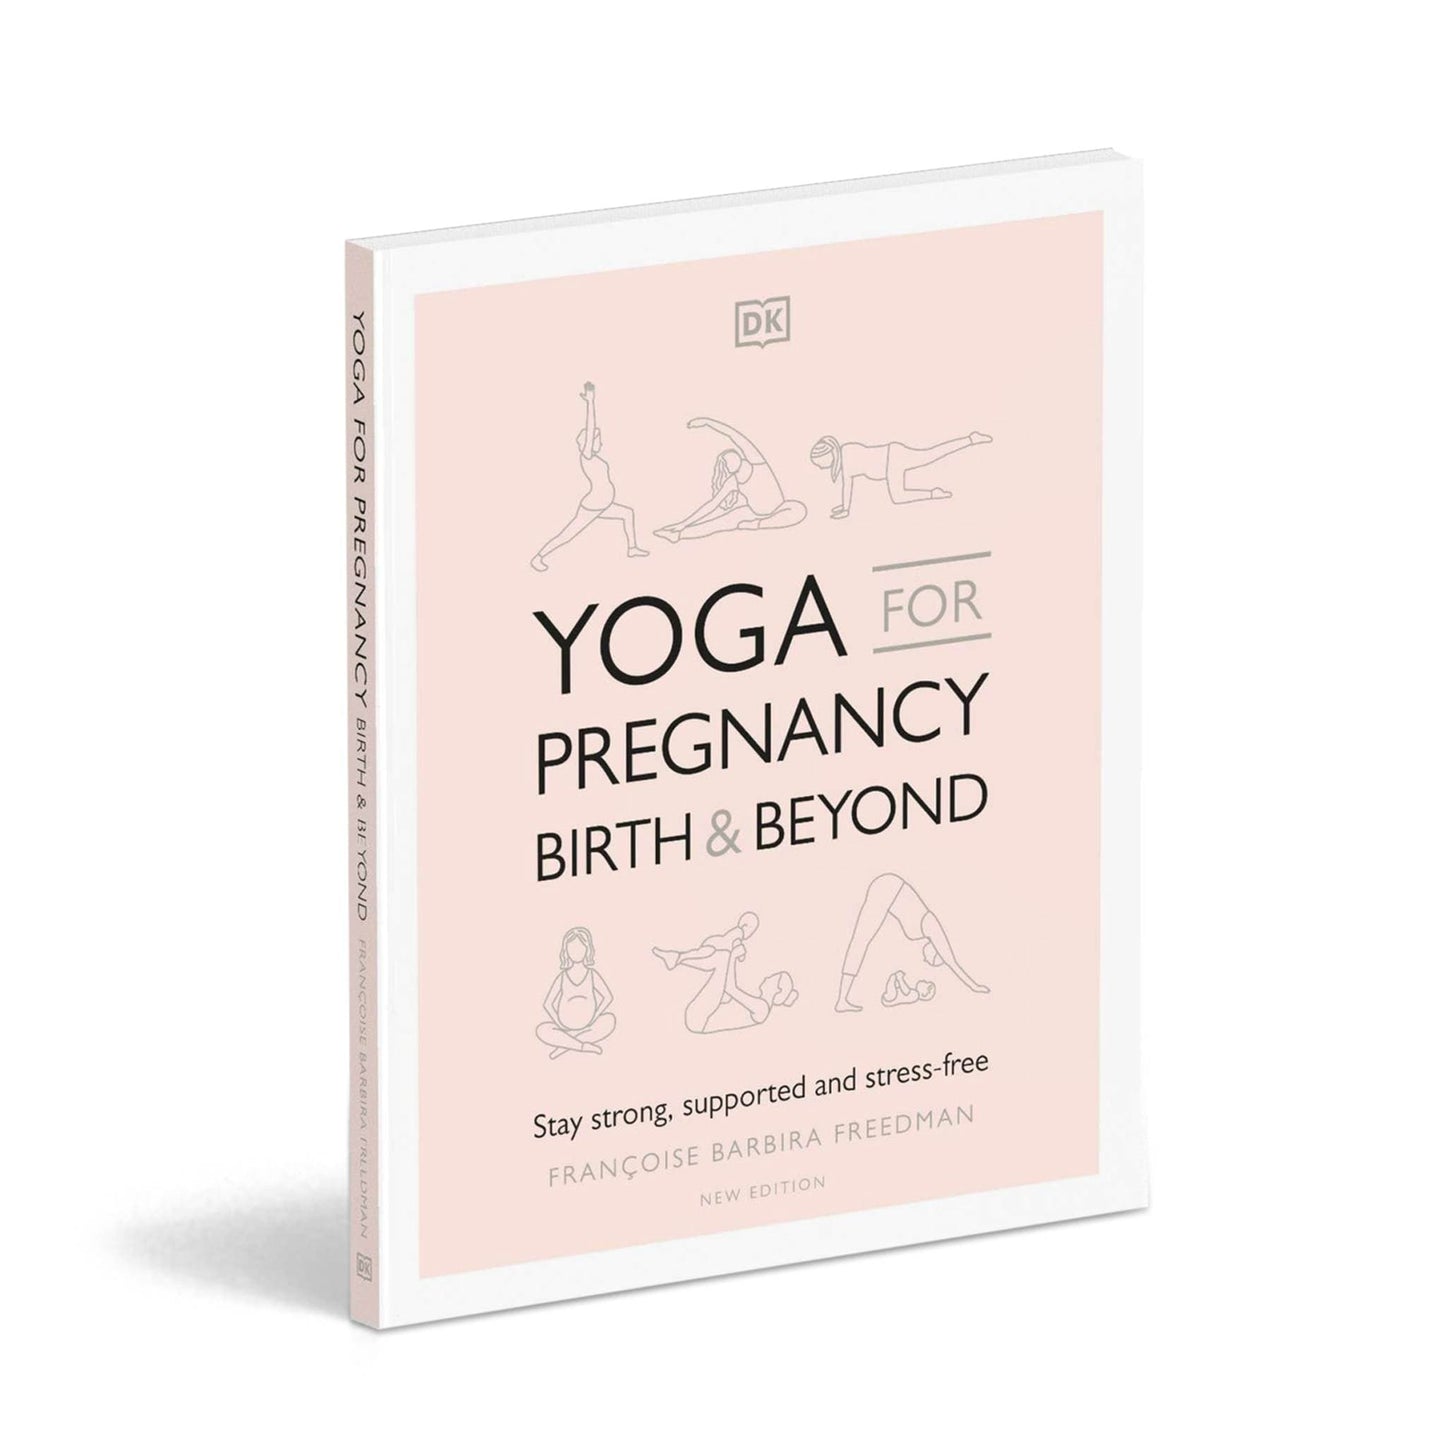 Our Bookshelf Print Books Yoga for Pregnancy, Birth & Beyond - Stay strong, supported and stress free - Francoise Barbira Freedman